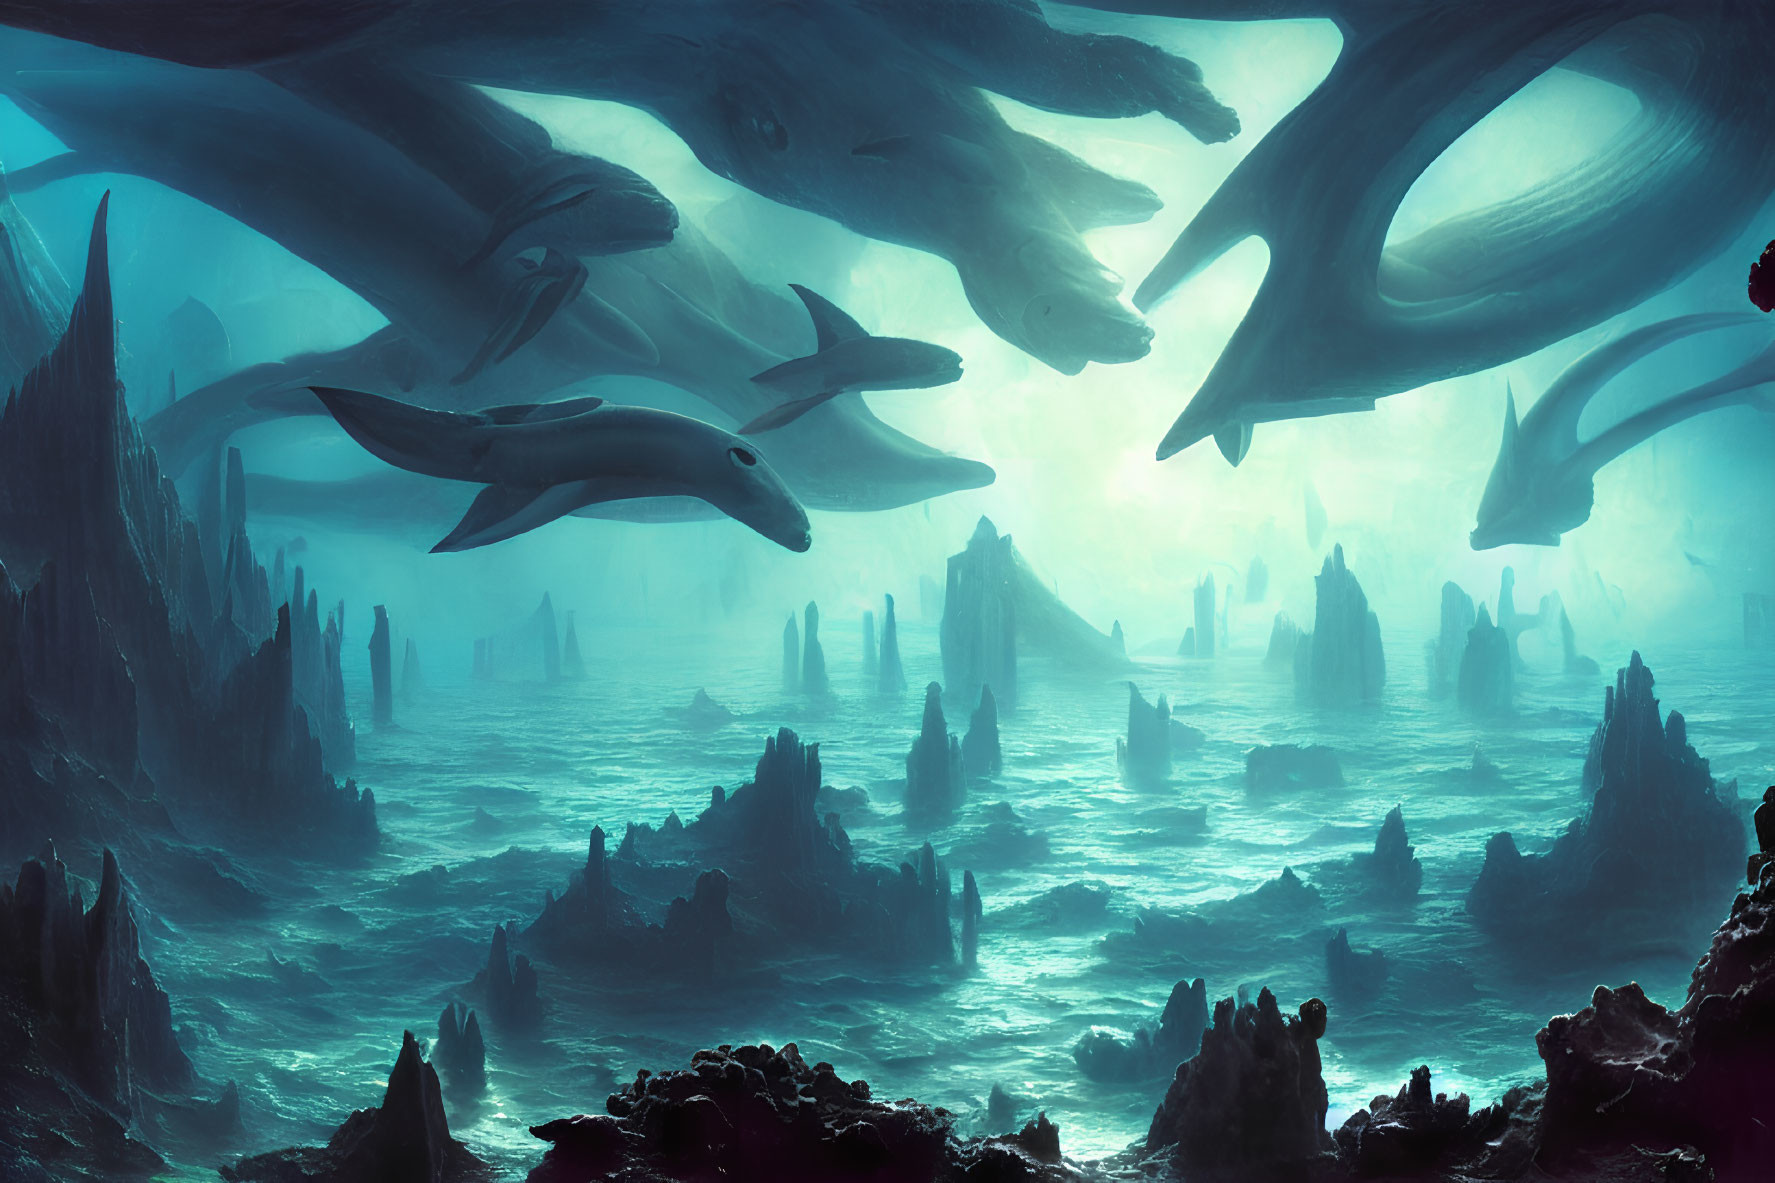 Underwater Scene: Dolphin-like Creatures & Rock Formations